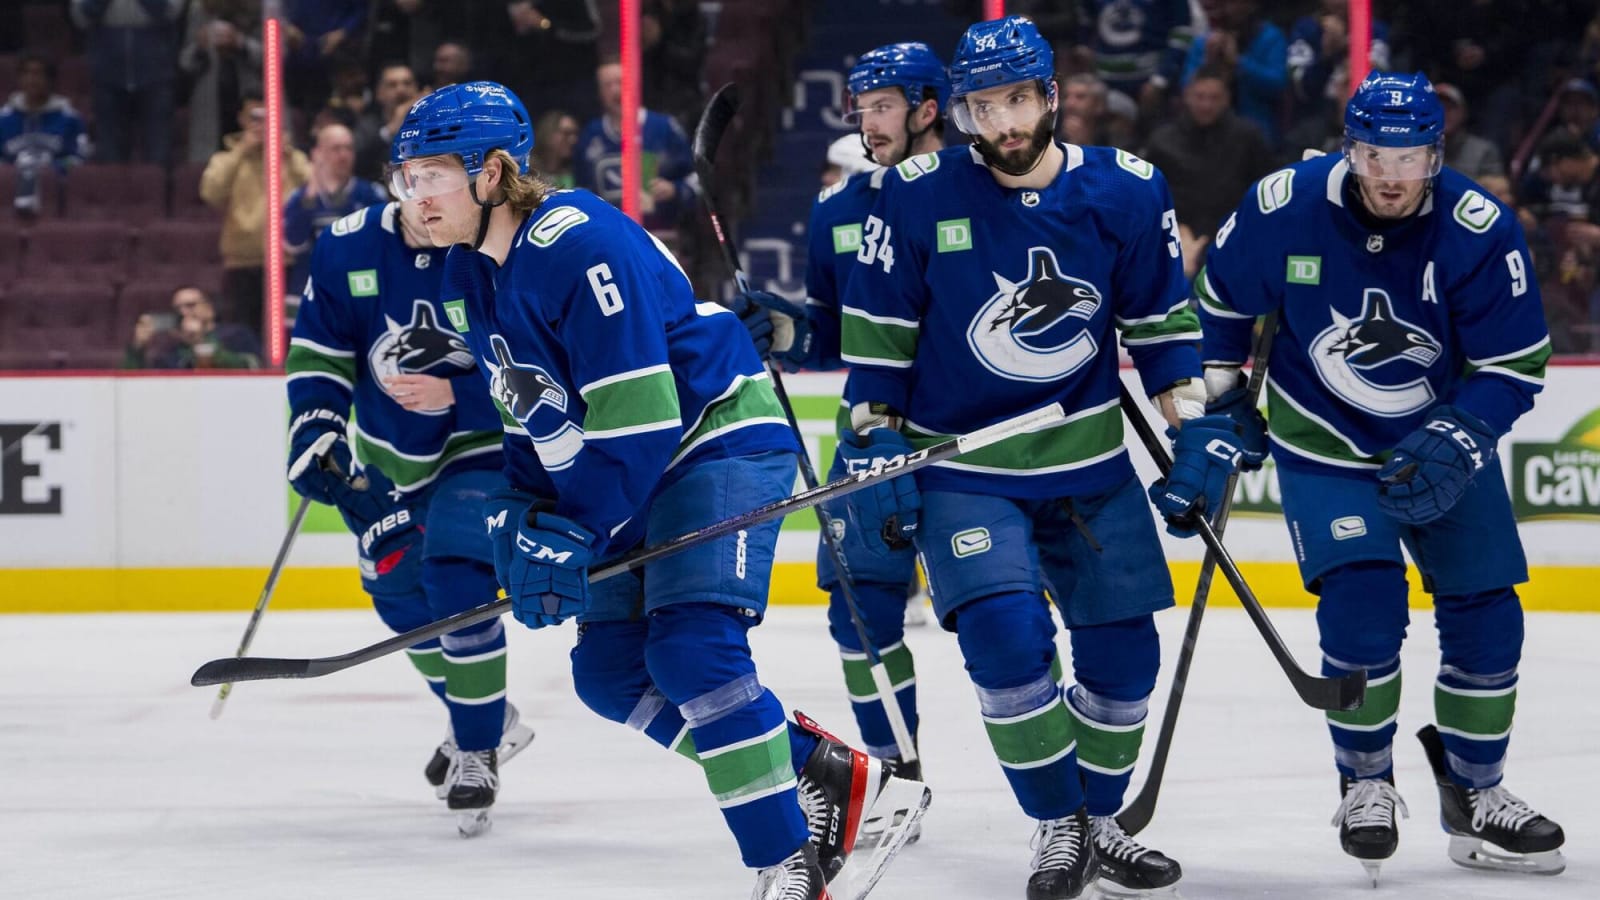 A step-by-step breakdown of the Canucks’ current cap structure, space, and situation